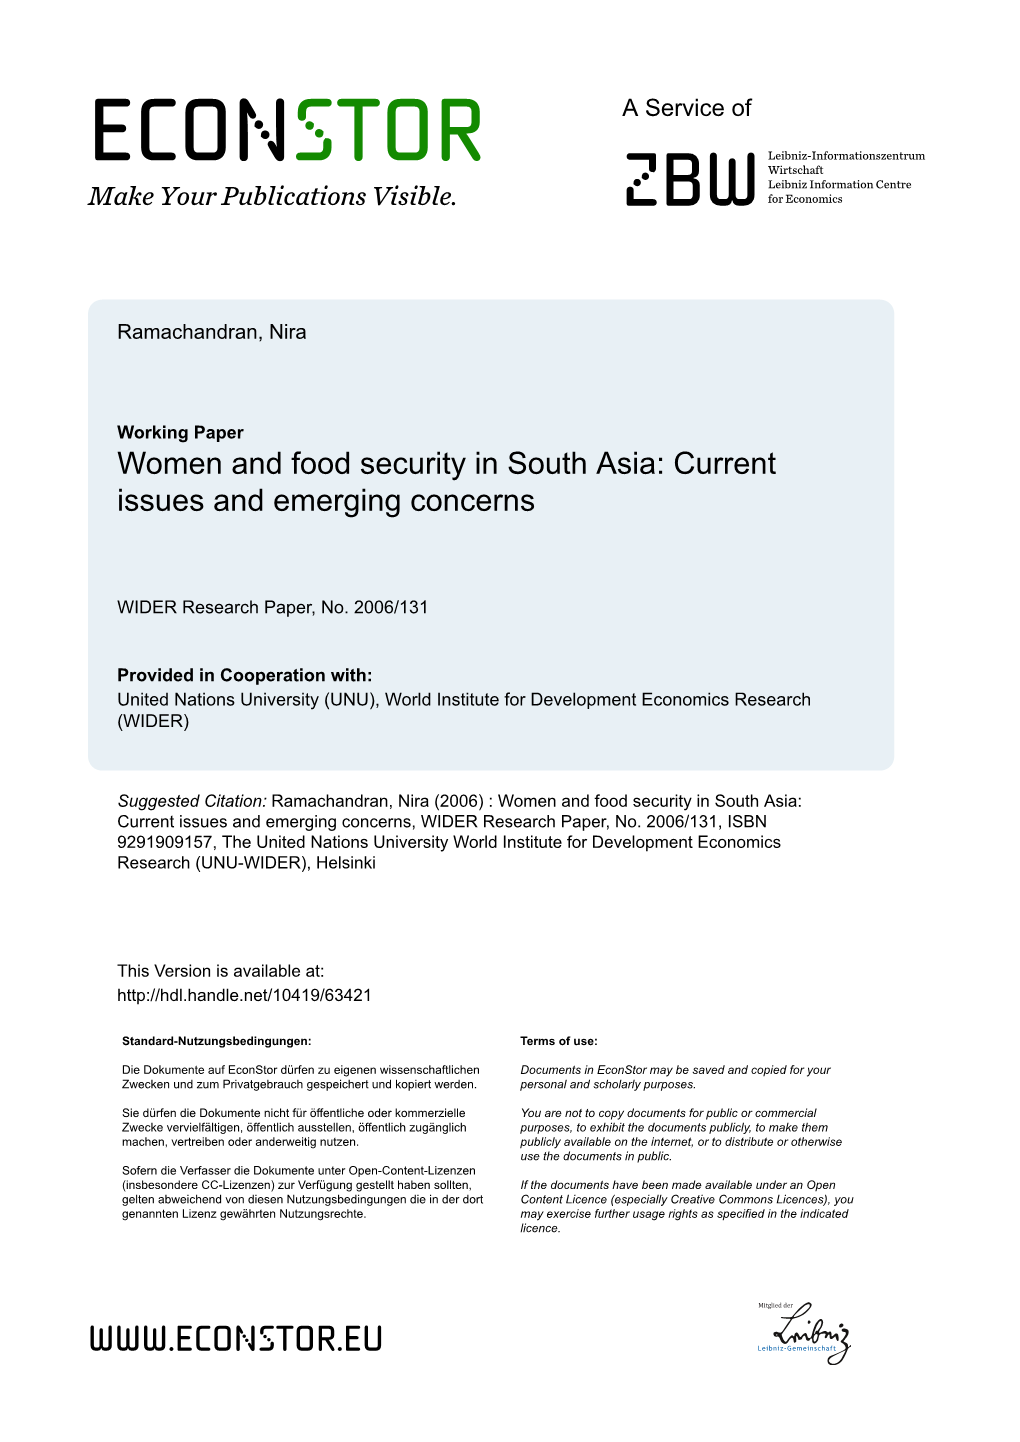 Women and Food Security in South Asia: Current Issues and Emerging Concerns